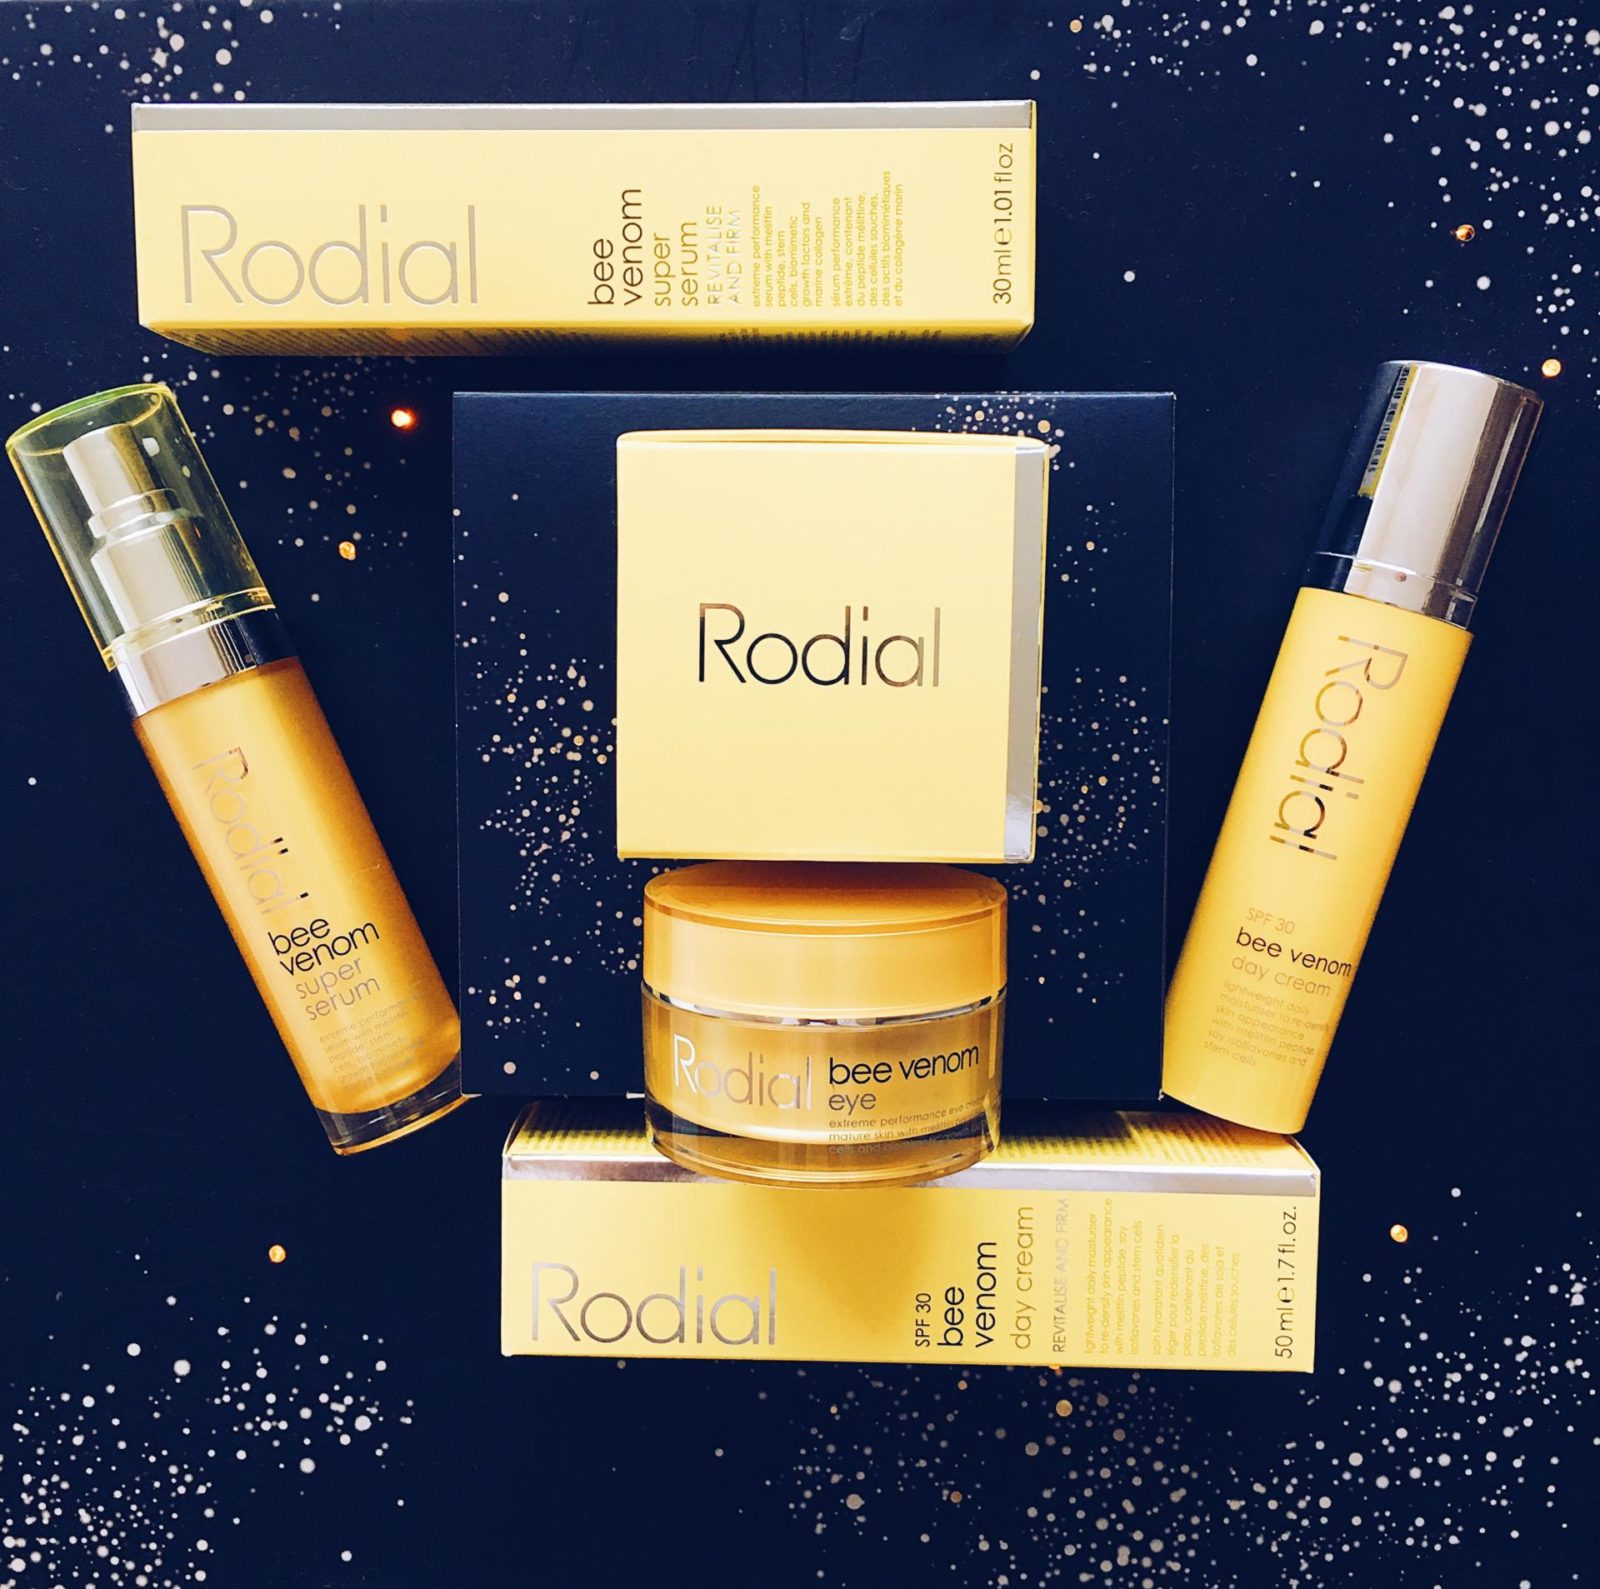 New Skin care routine with Rodial Skin Care